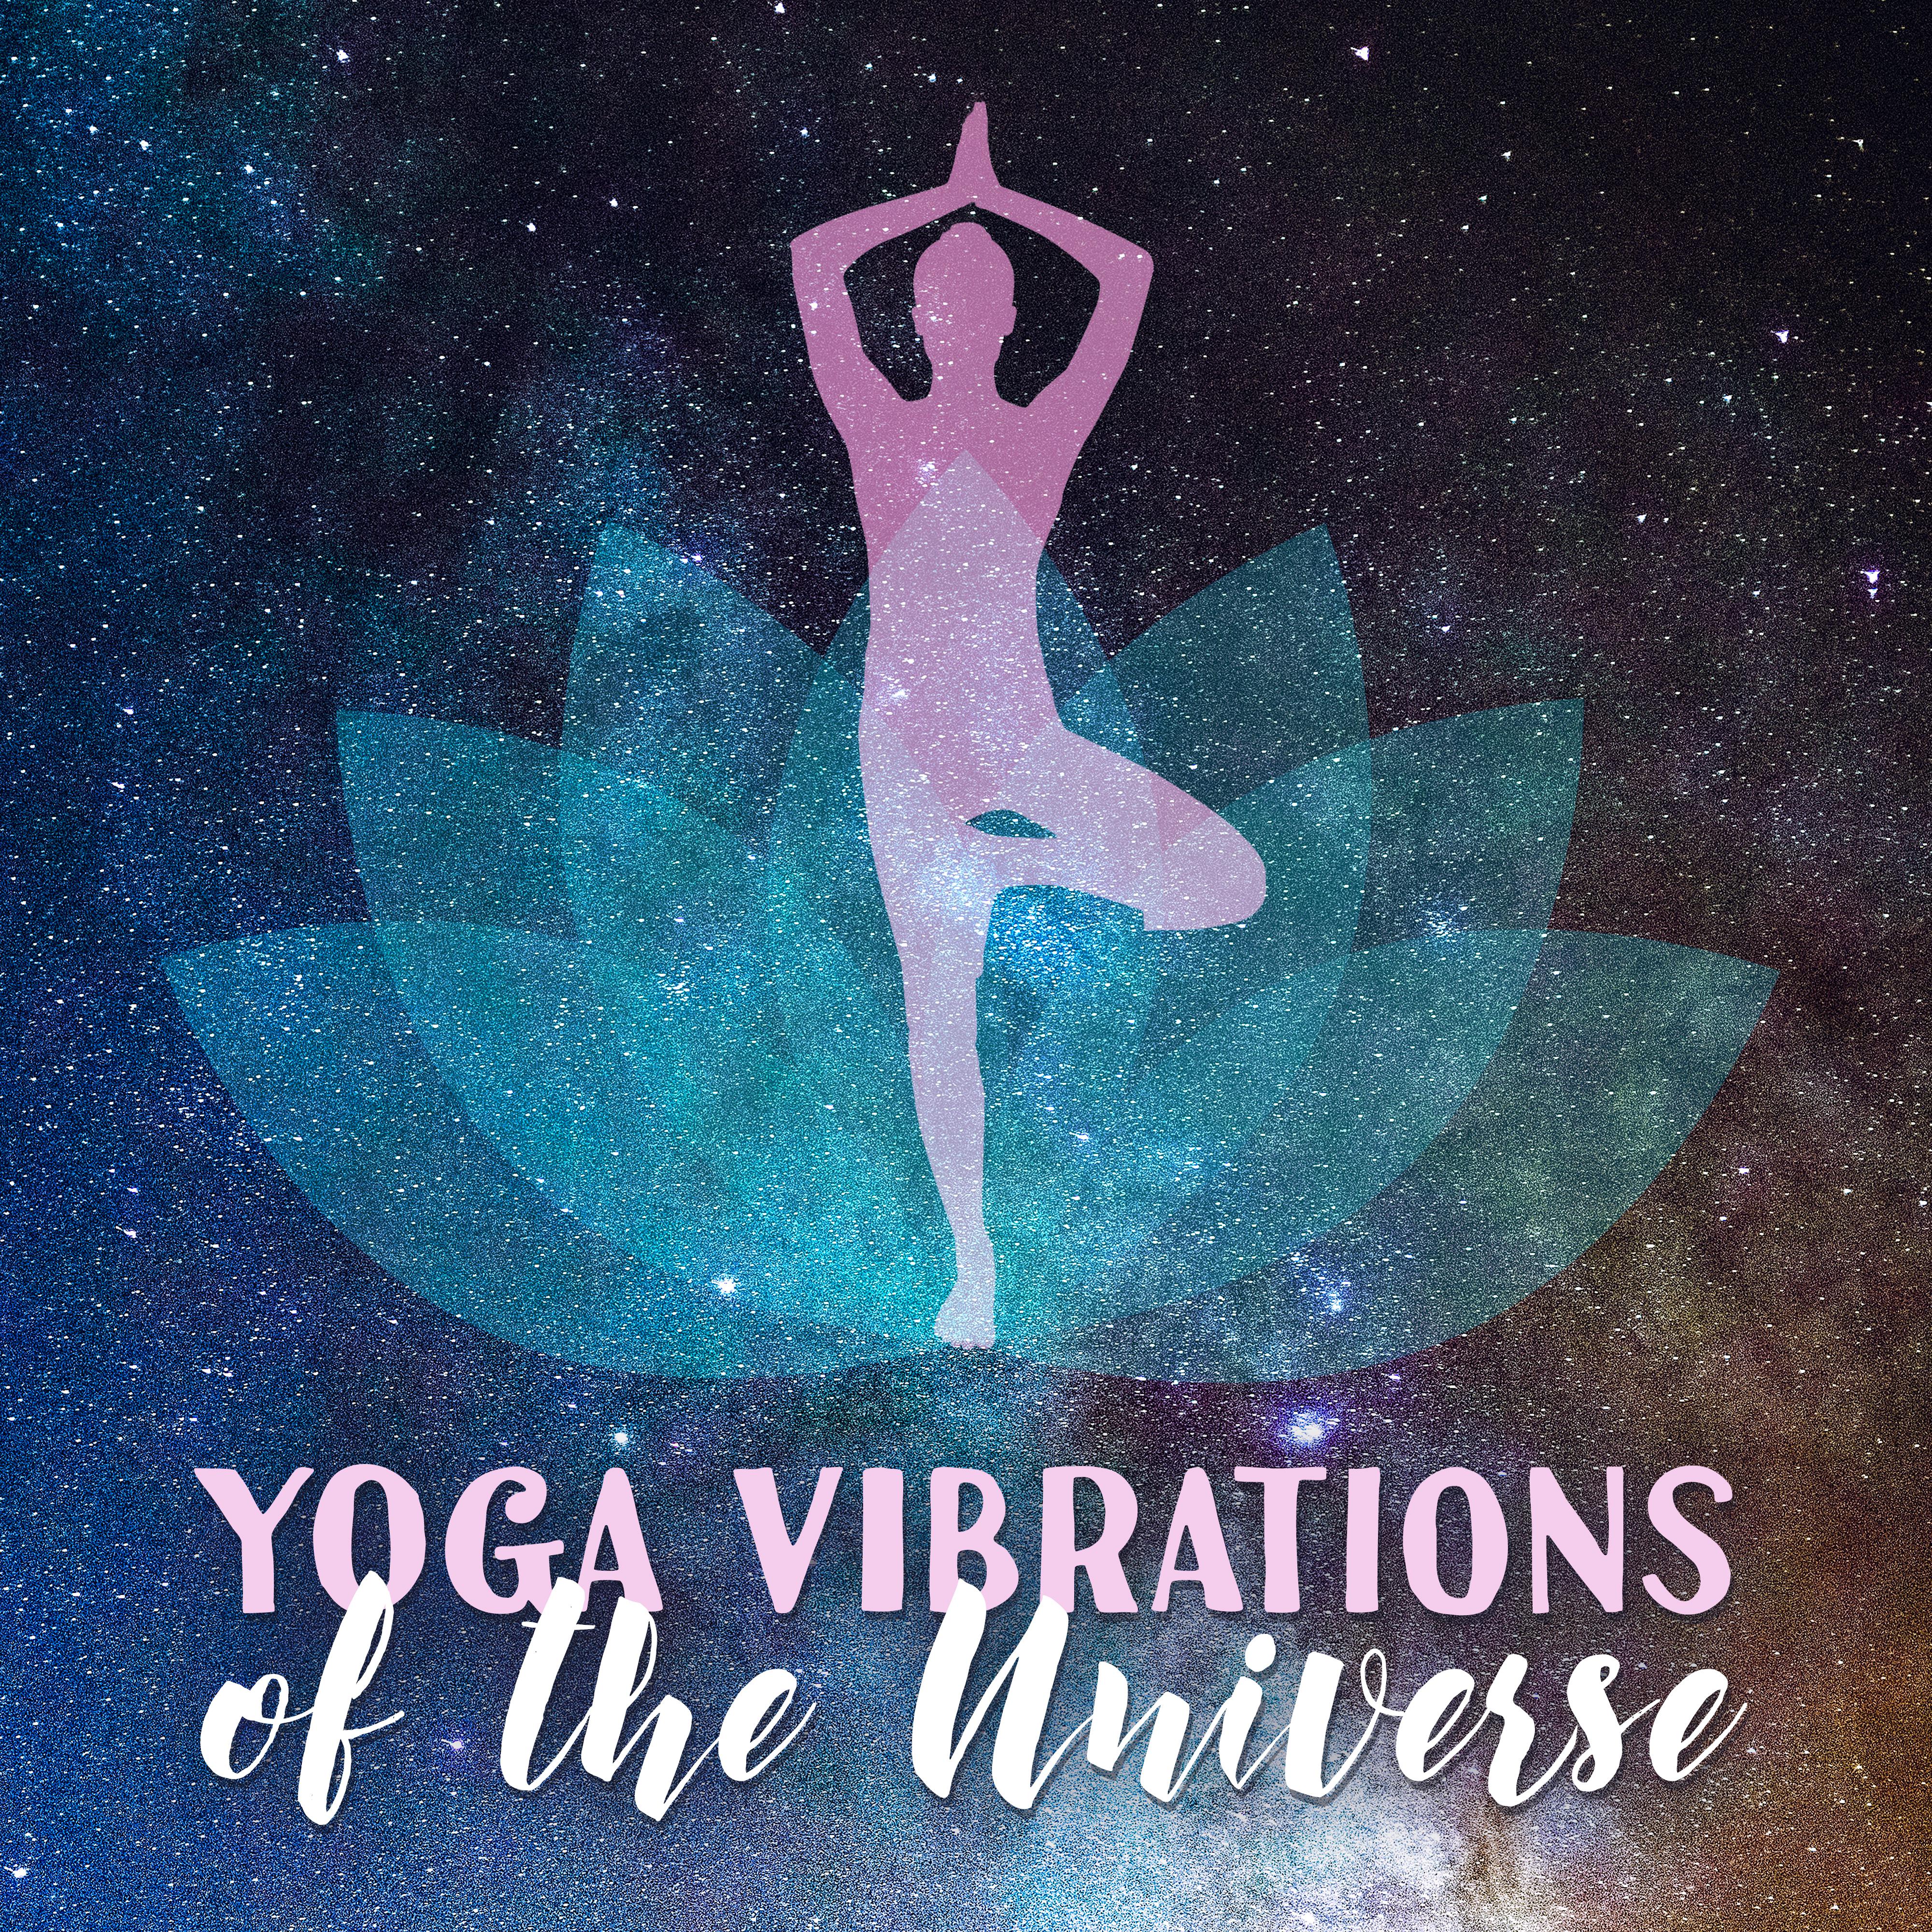 Yoga Vibrations of the Universe – 2019 New Age Ambient Music for Meditation & Deep Relaxation, Vital Energy Increase, Zen Melodies, Chakra Healing, Third Eye Open